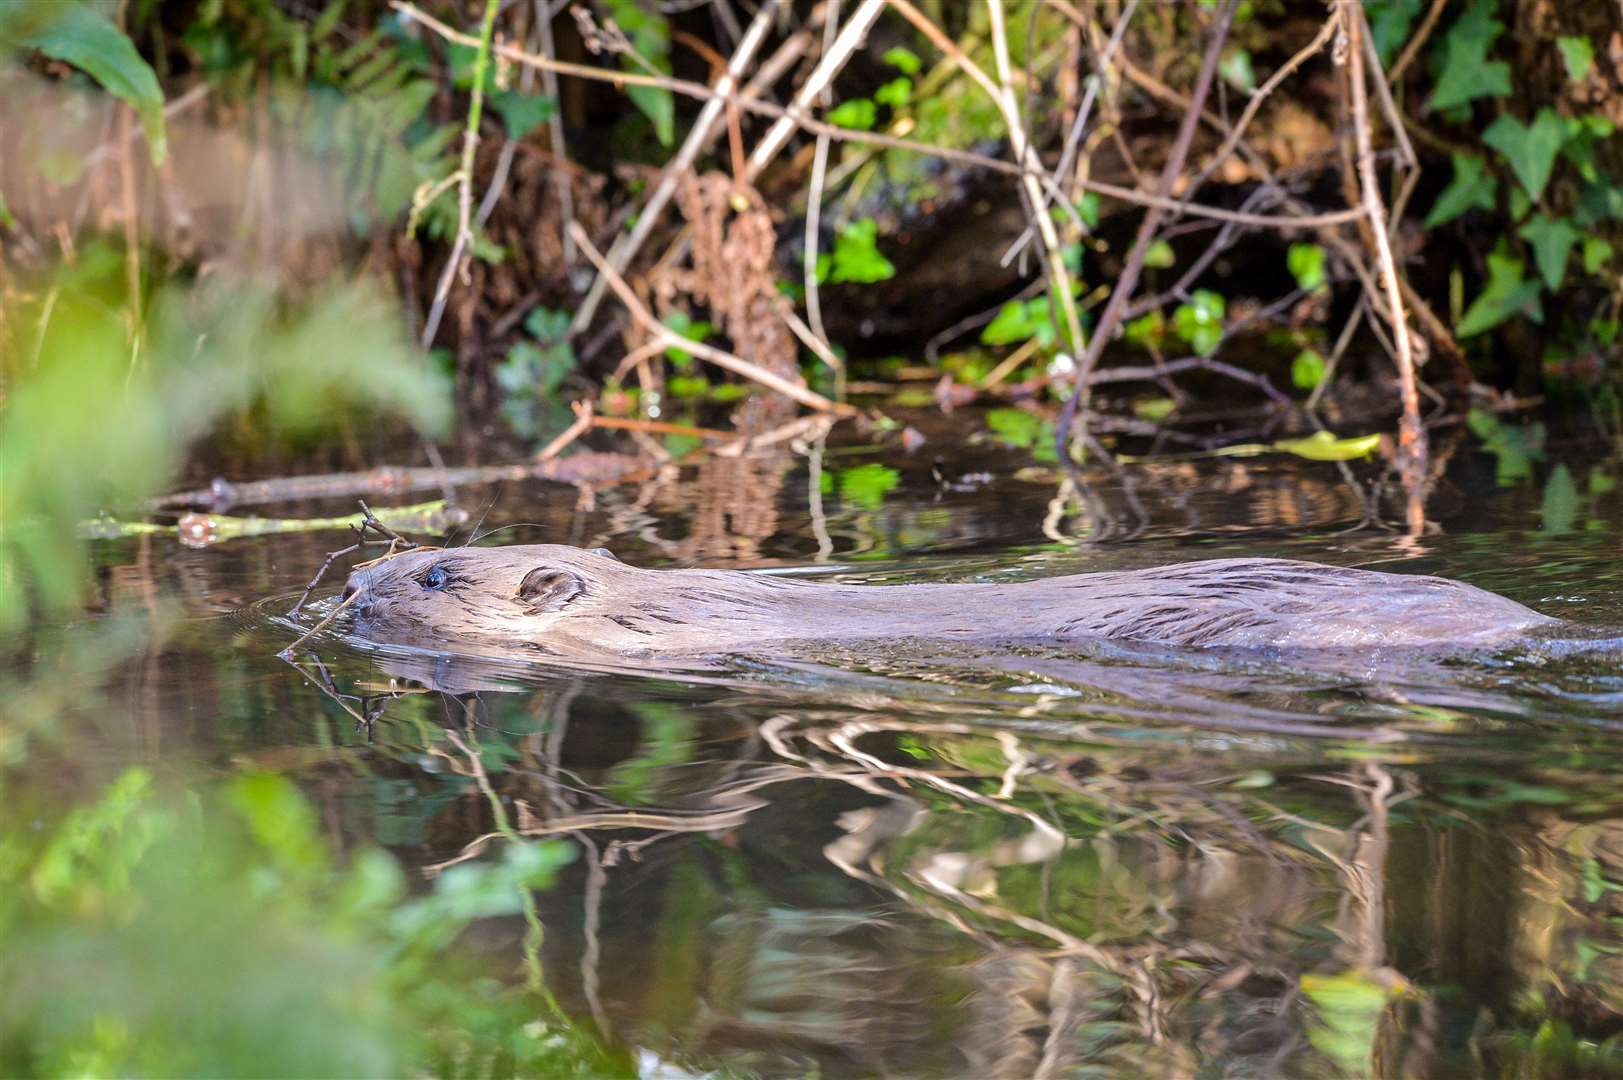 Conservationists back the return of beavers to help restore wetlands (Ben Birchall/PA)